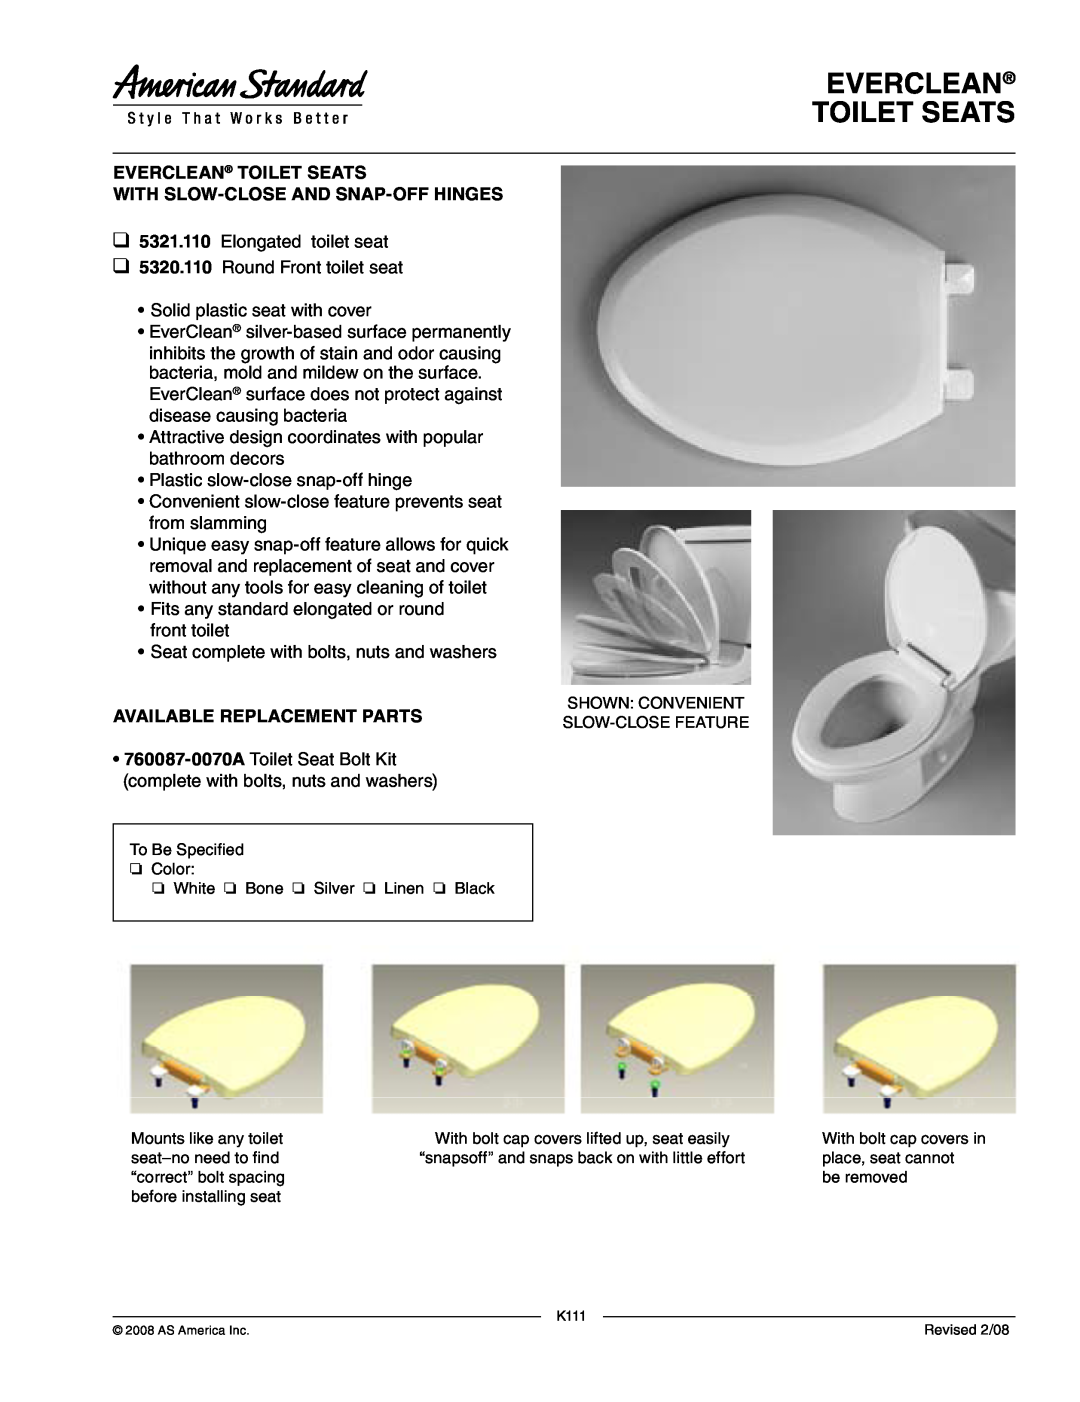 American Standard 5321.110 manual Everclean Toilet Seats, With Slow-Closeand Snap-Offhinges, Available Replacement Parts 